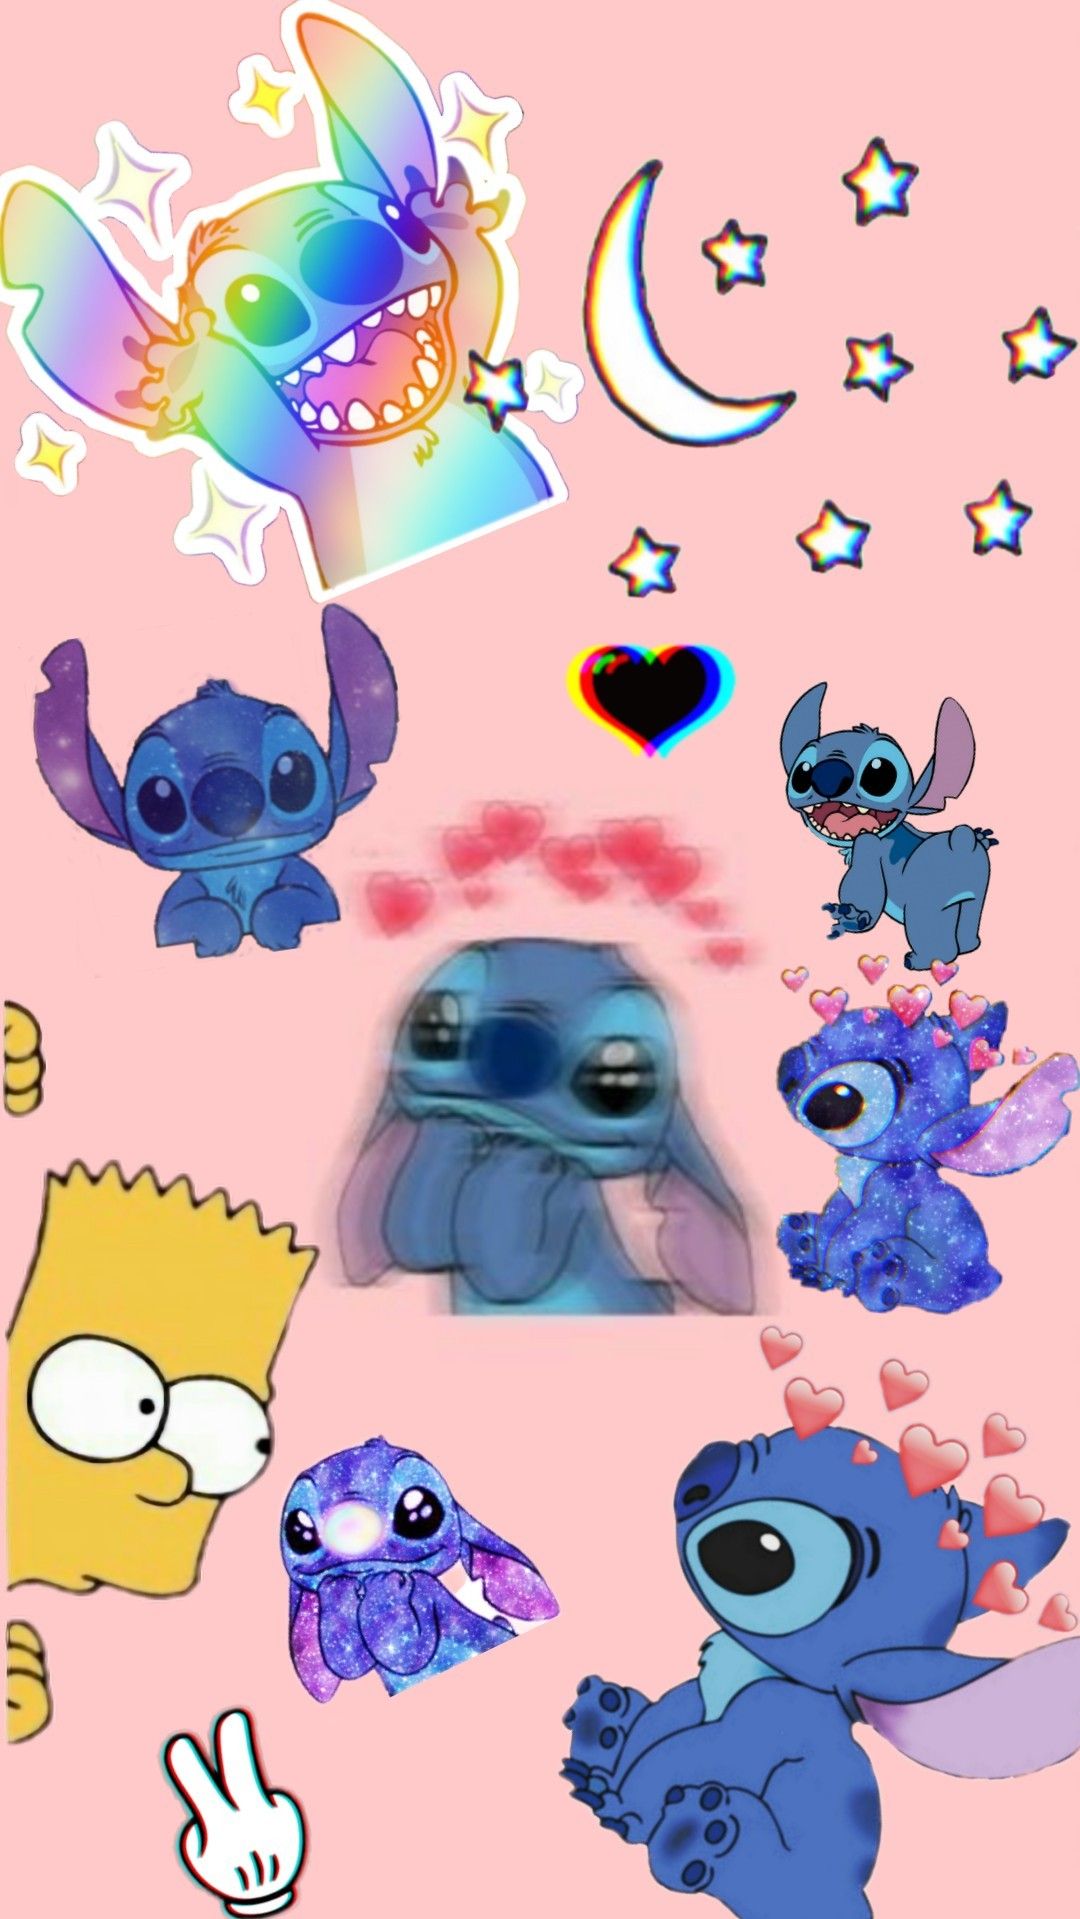 Lilo  Stitch iPhone wallpaper in all its glory You can find more Disney